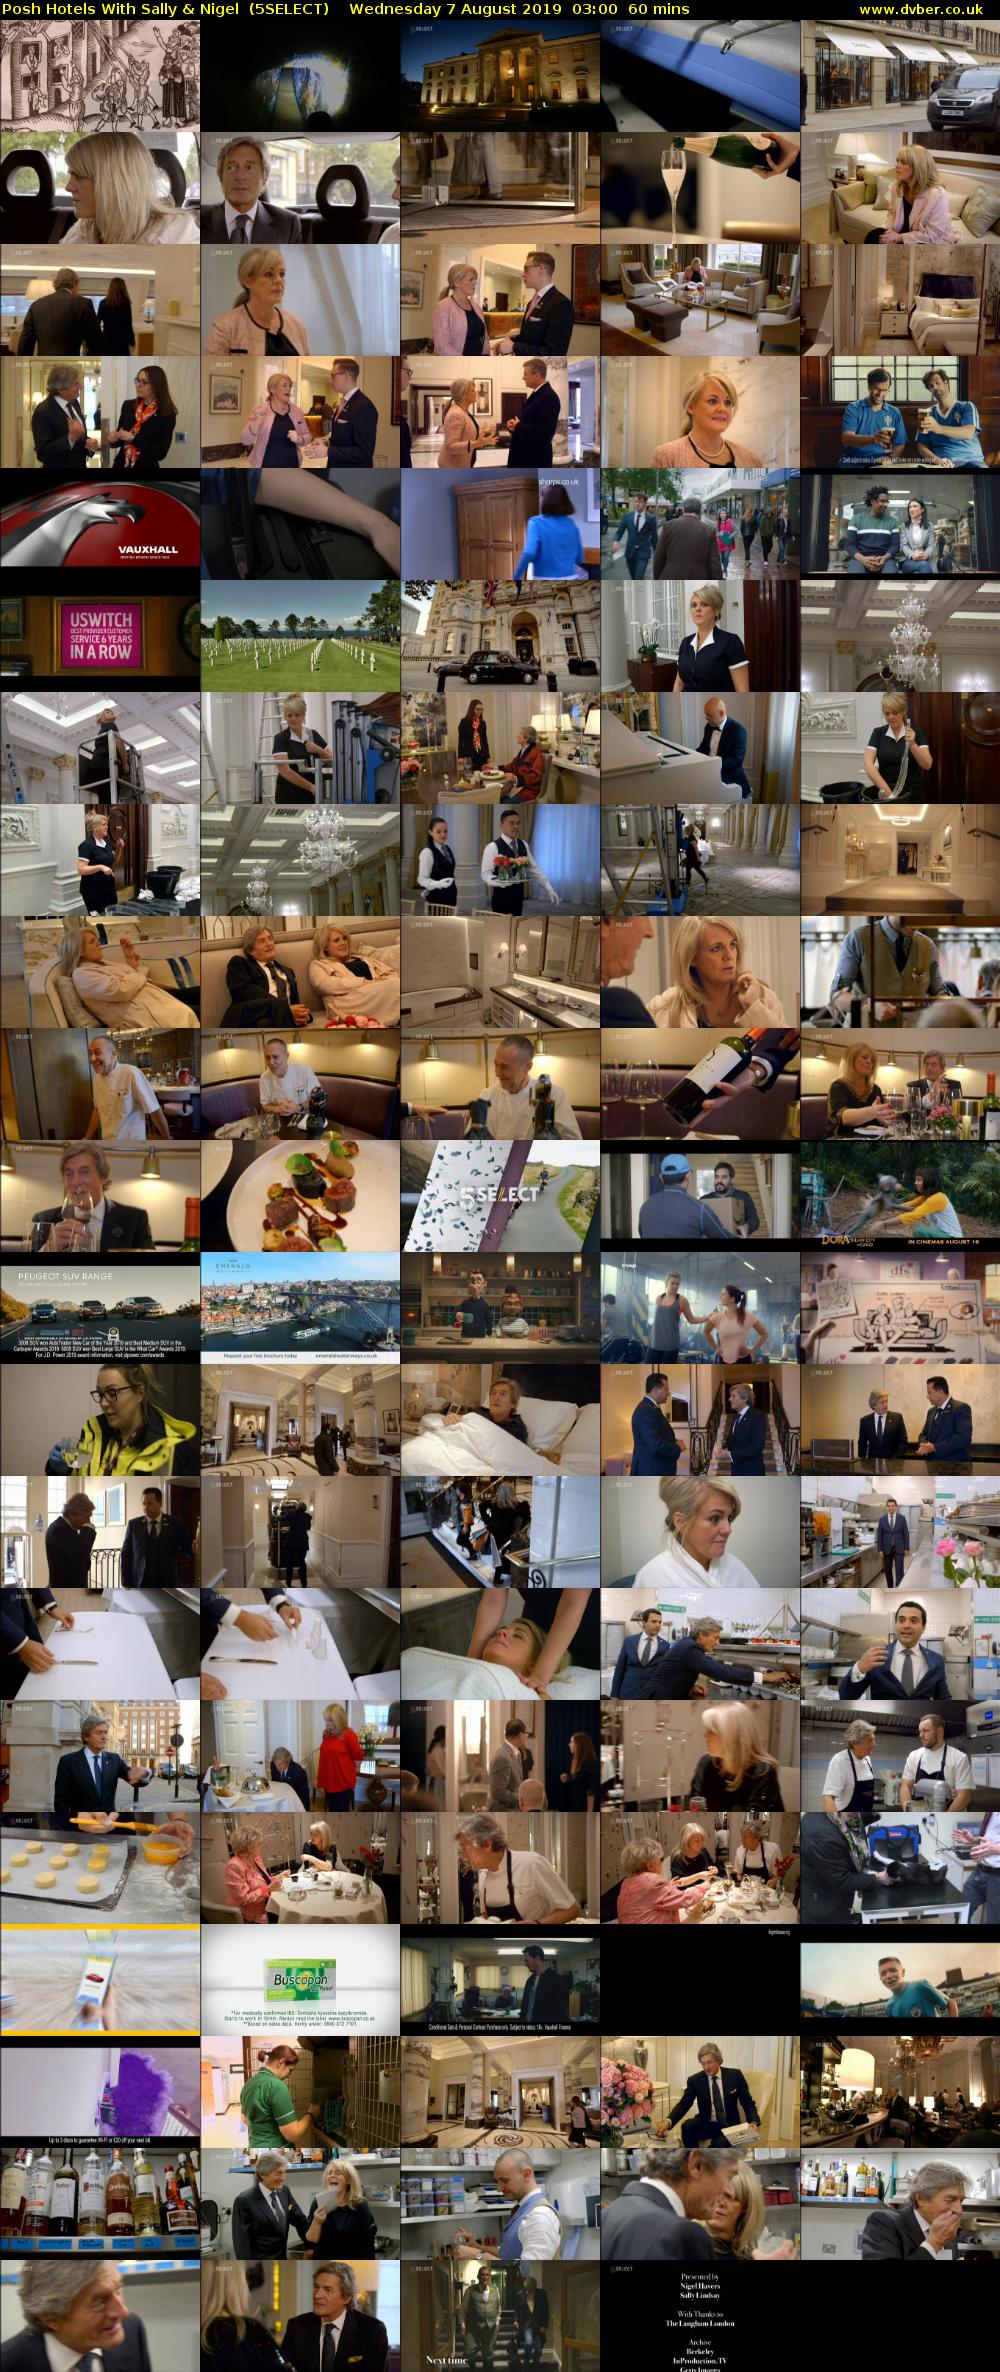 Posh Hotels WIth Sally & Nigel  (5SELECT) Wednesday 7 August 2019 03:00 - 04:00